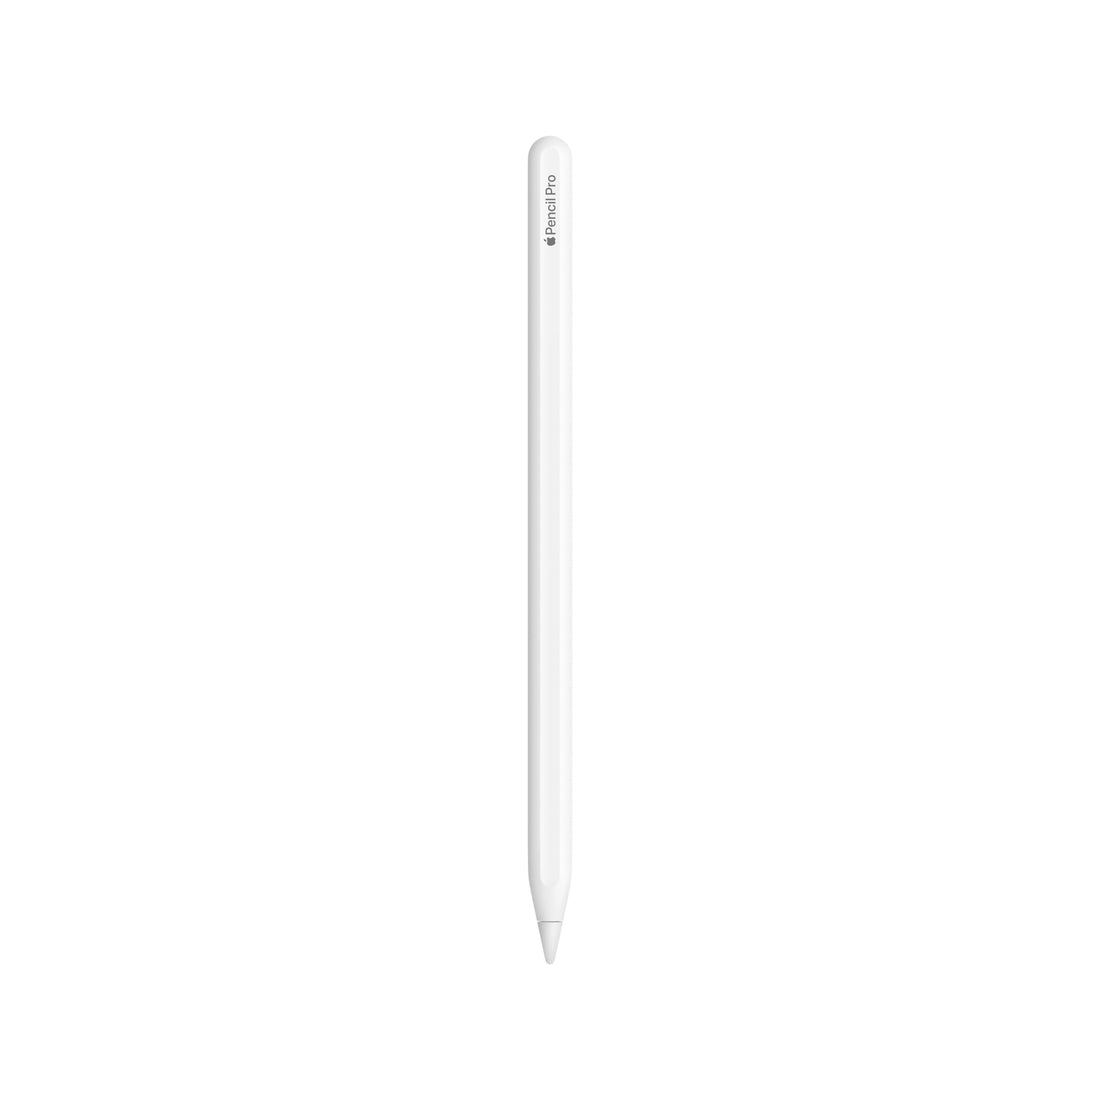 Apple Pencil Pro: Advanced Tools, Pixel-Perfect Precision, Tilt and Pressure Sensitivity, and Industry-Leading Low Latency fo